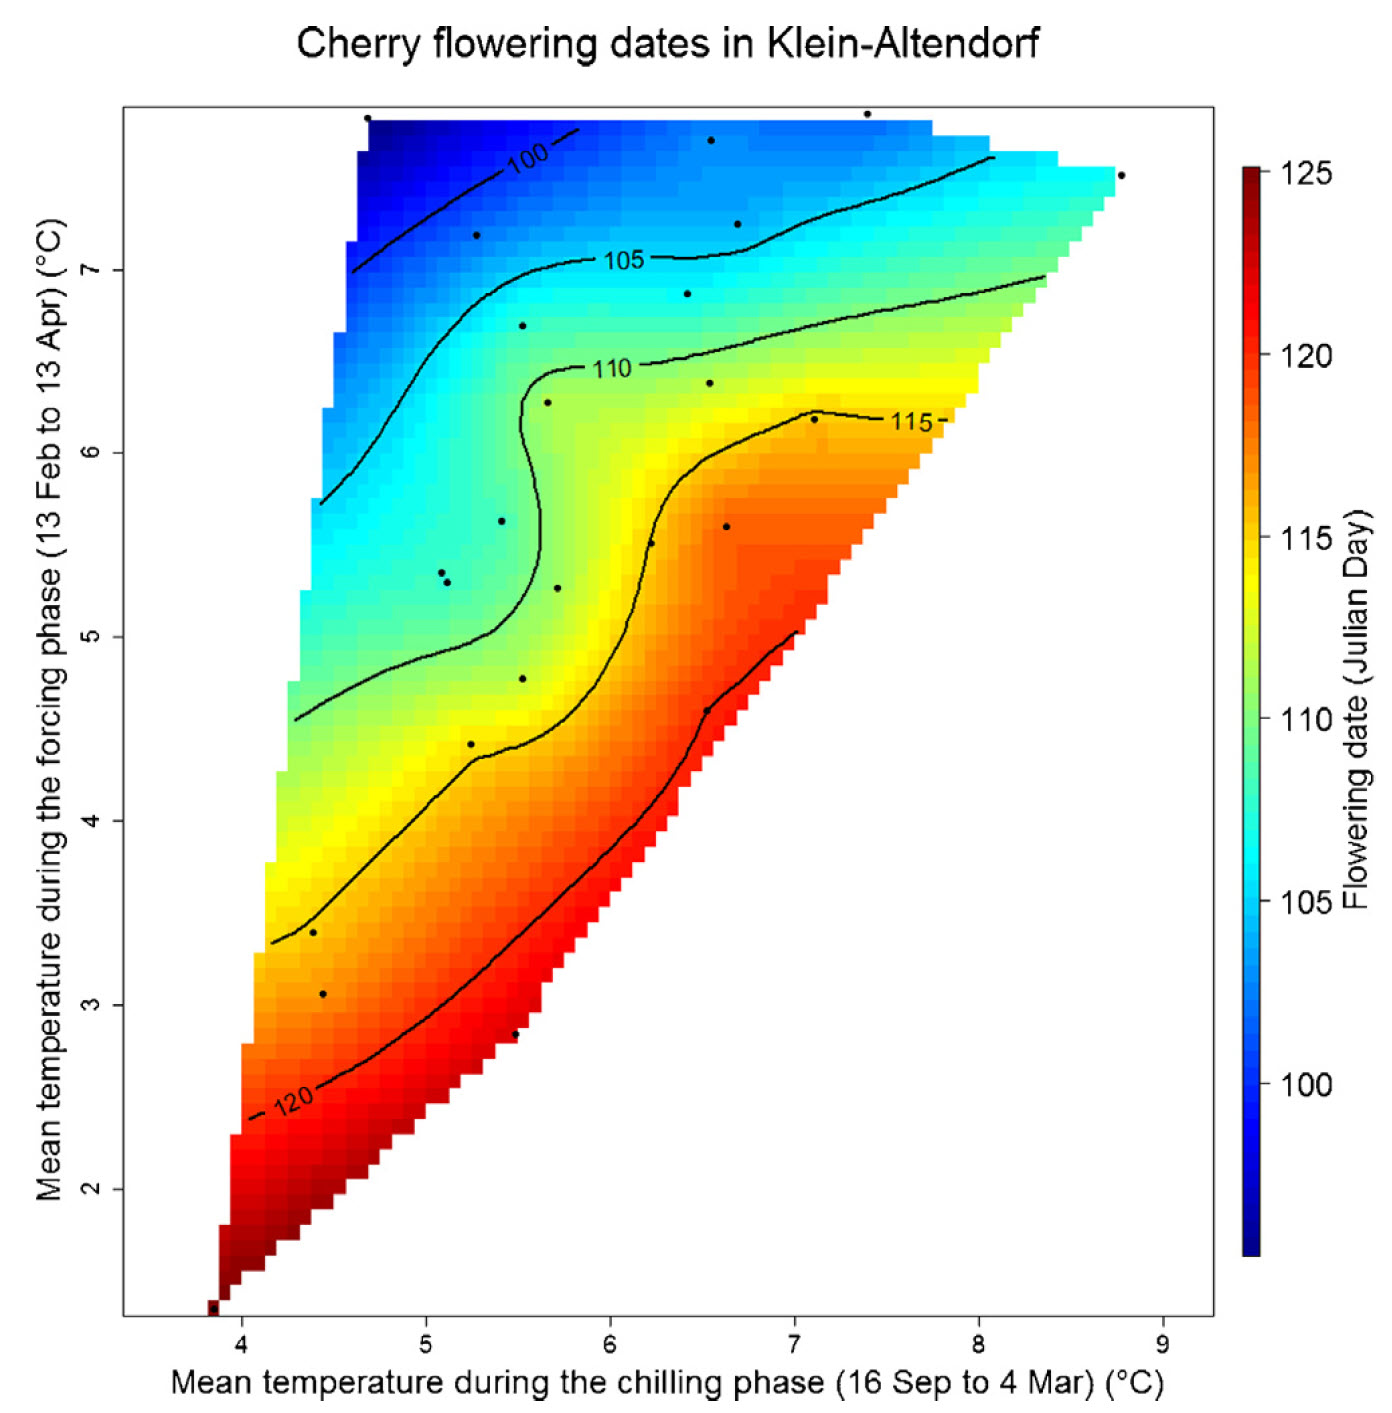 Bloom dates of cherries ‘Schneiders späte Knorpelkirsche’ in Klein-Altendorf, as a function of mean temperatures during the chilling and forcing phases (Luedeling et al., 2013a)